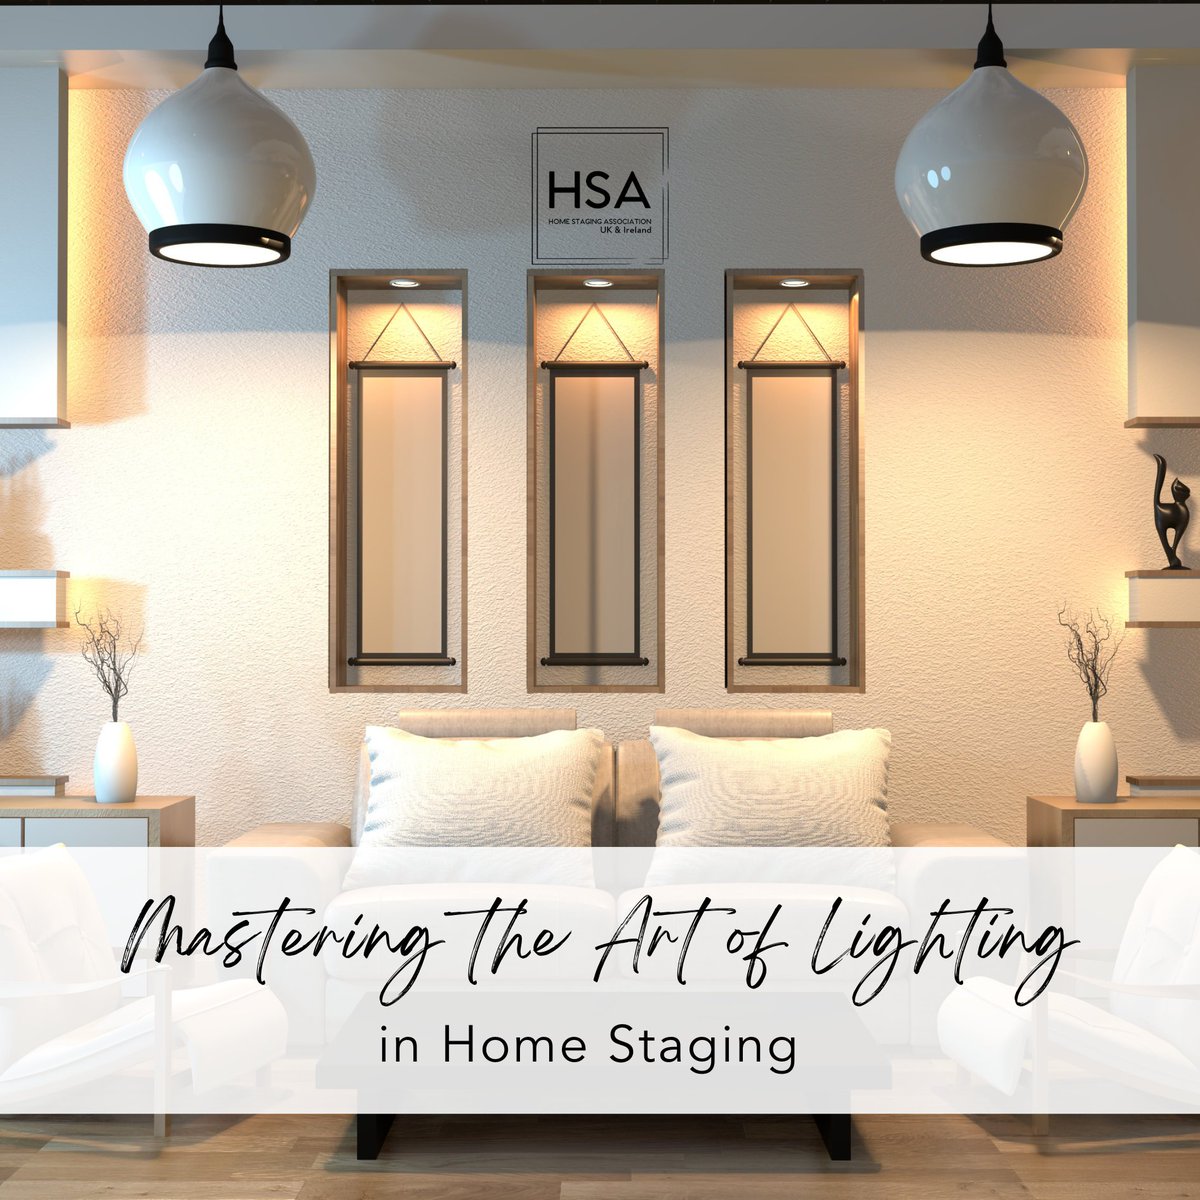 Did you know that the right lighting can make or break a space?

Visit our Facebook and Instagram pages to see our tips!

#homestagingtips #lightingtips #inhousephotographyuk #homestagingbusiness #homestaginguk #homestagingireland #hsauk